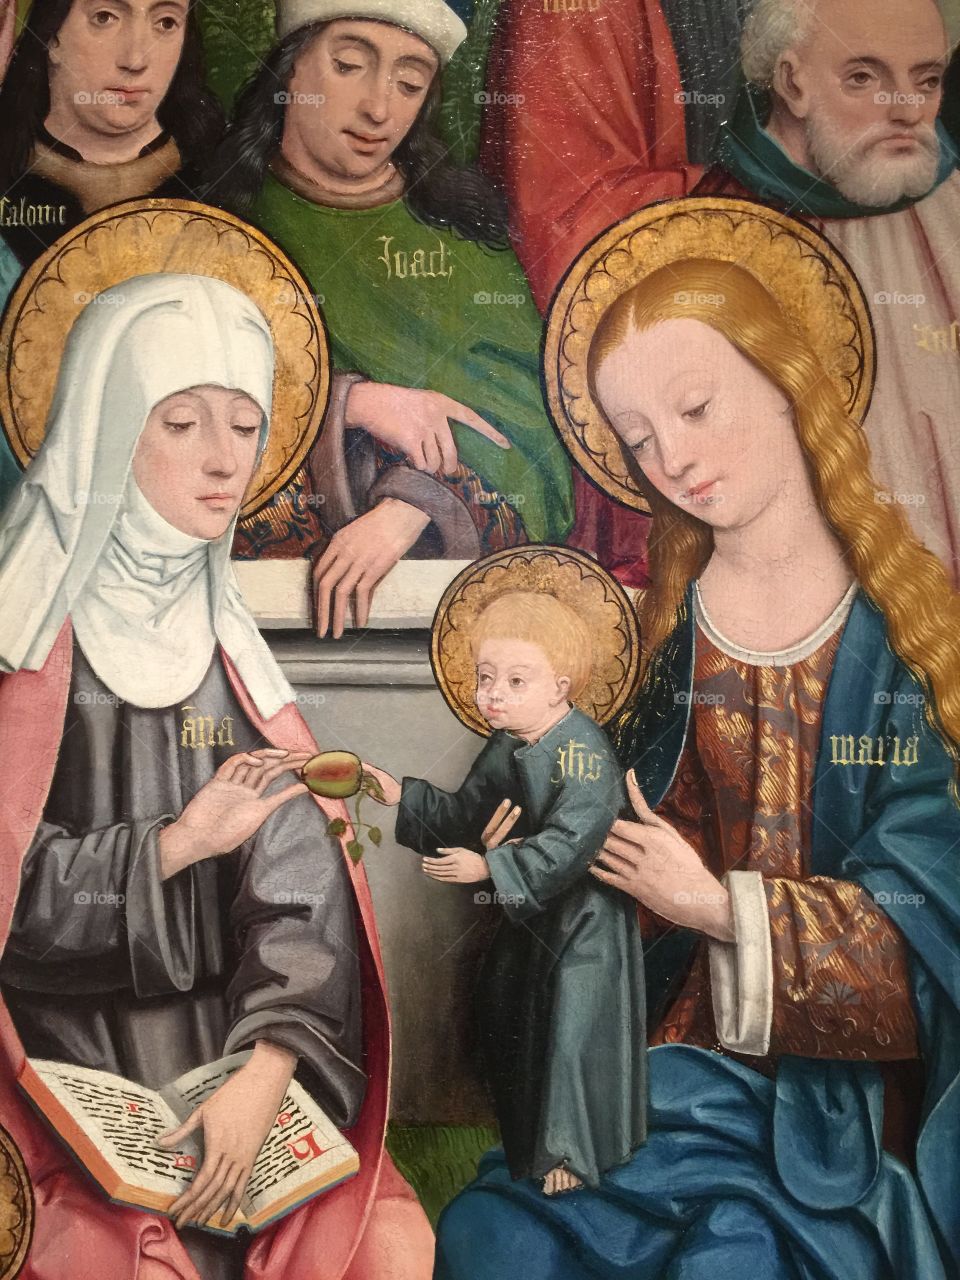 Anne, Mary and Jezus